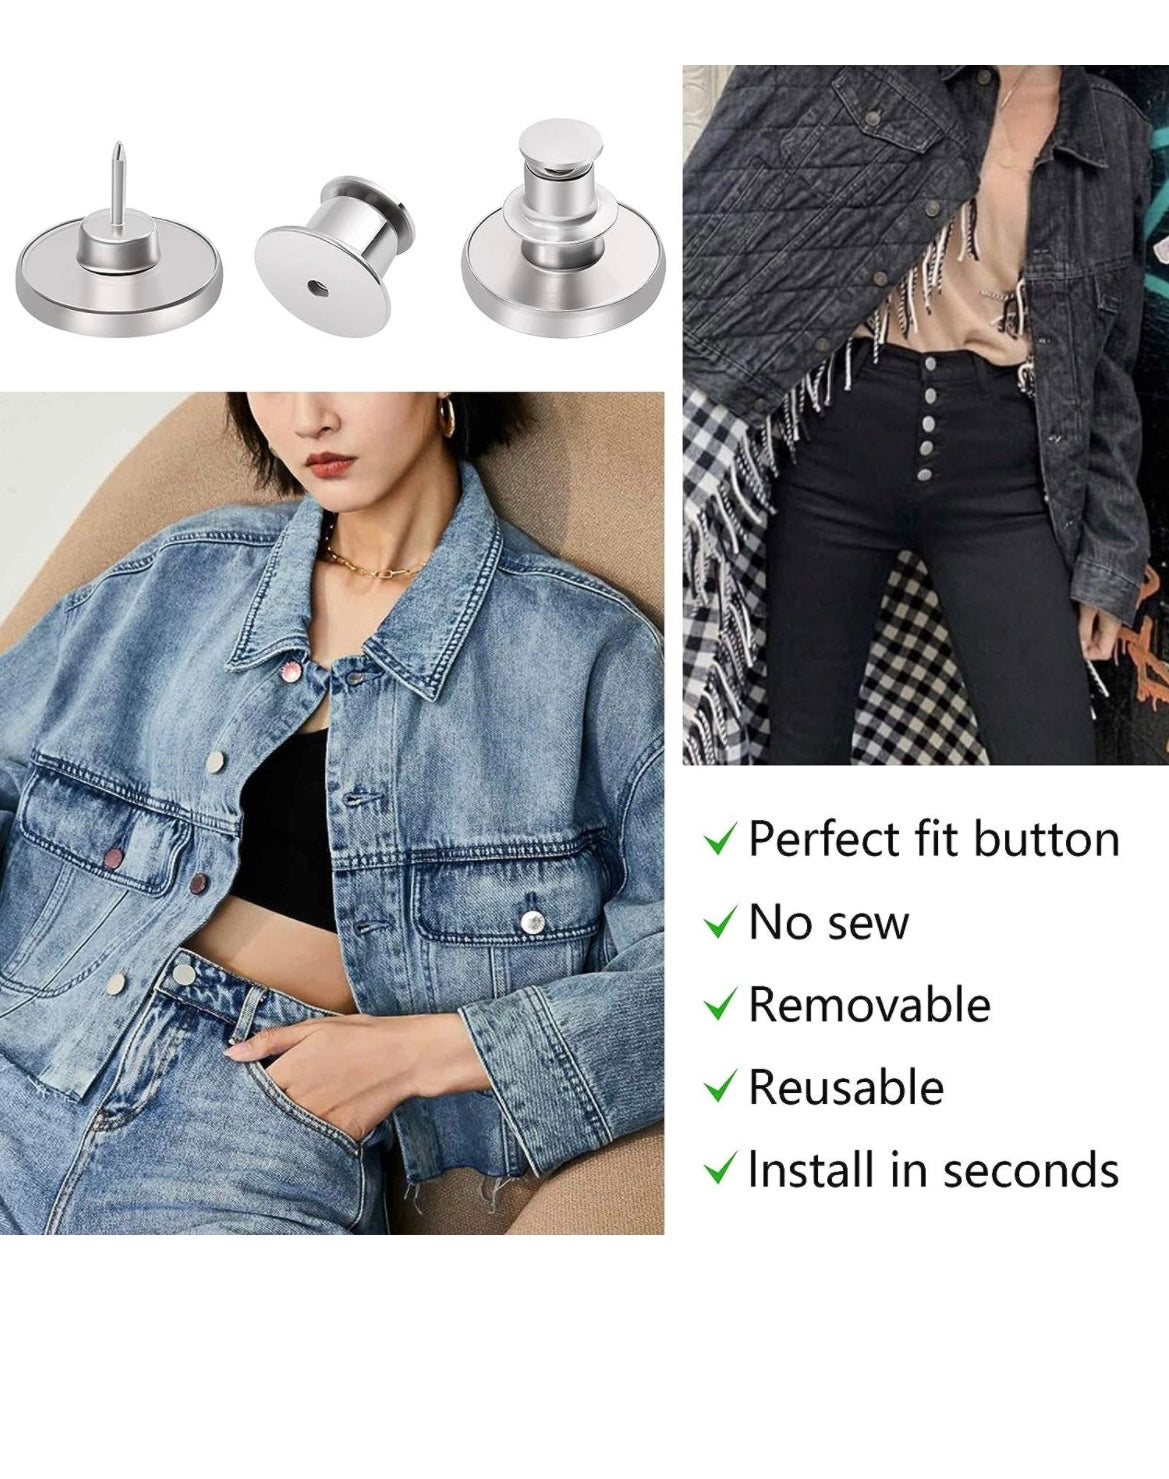 perfect fit buttons